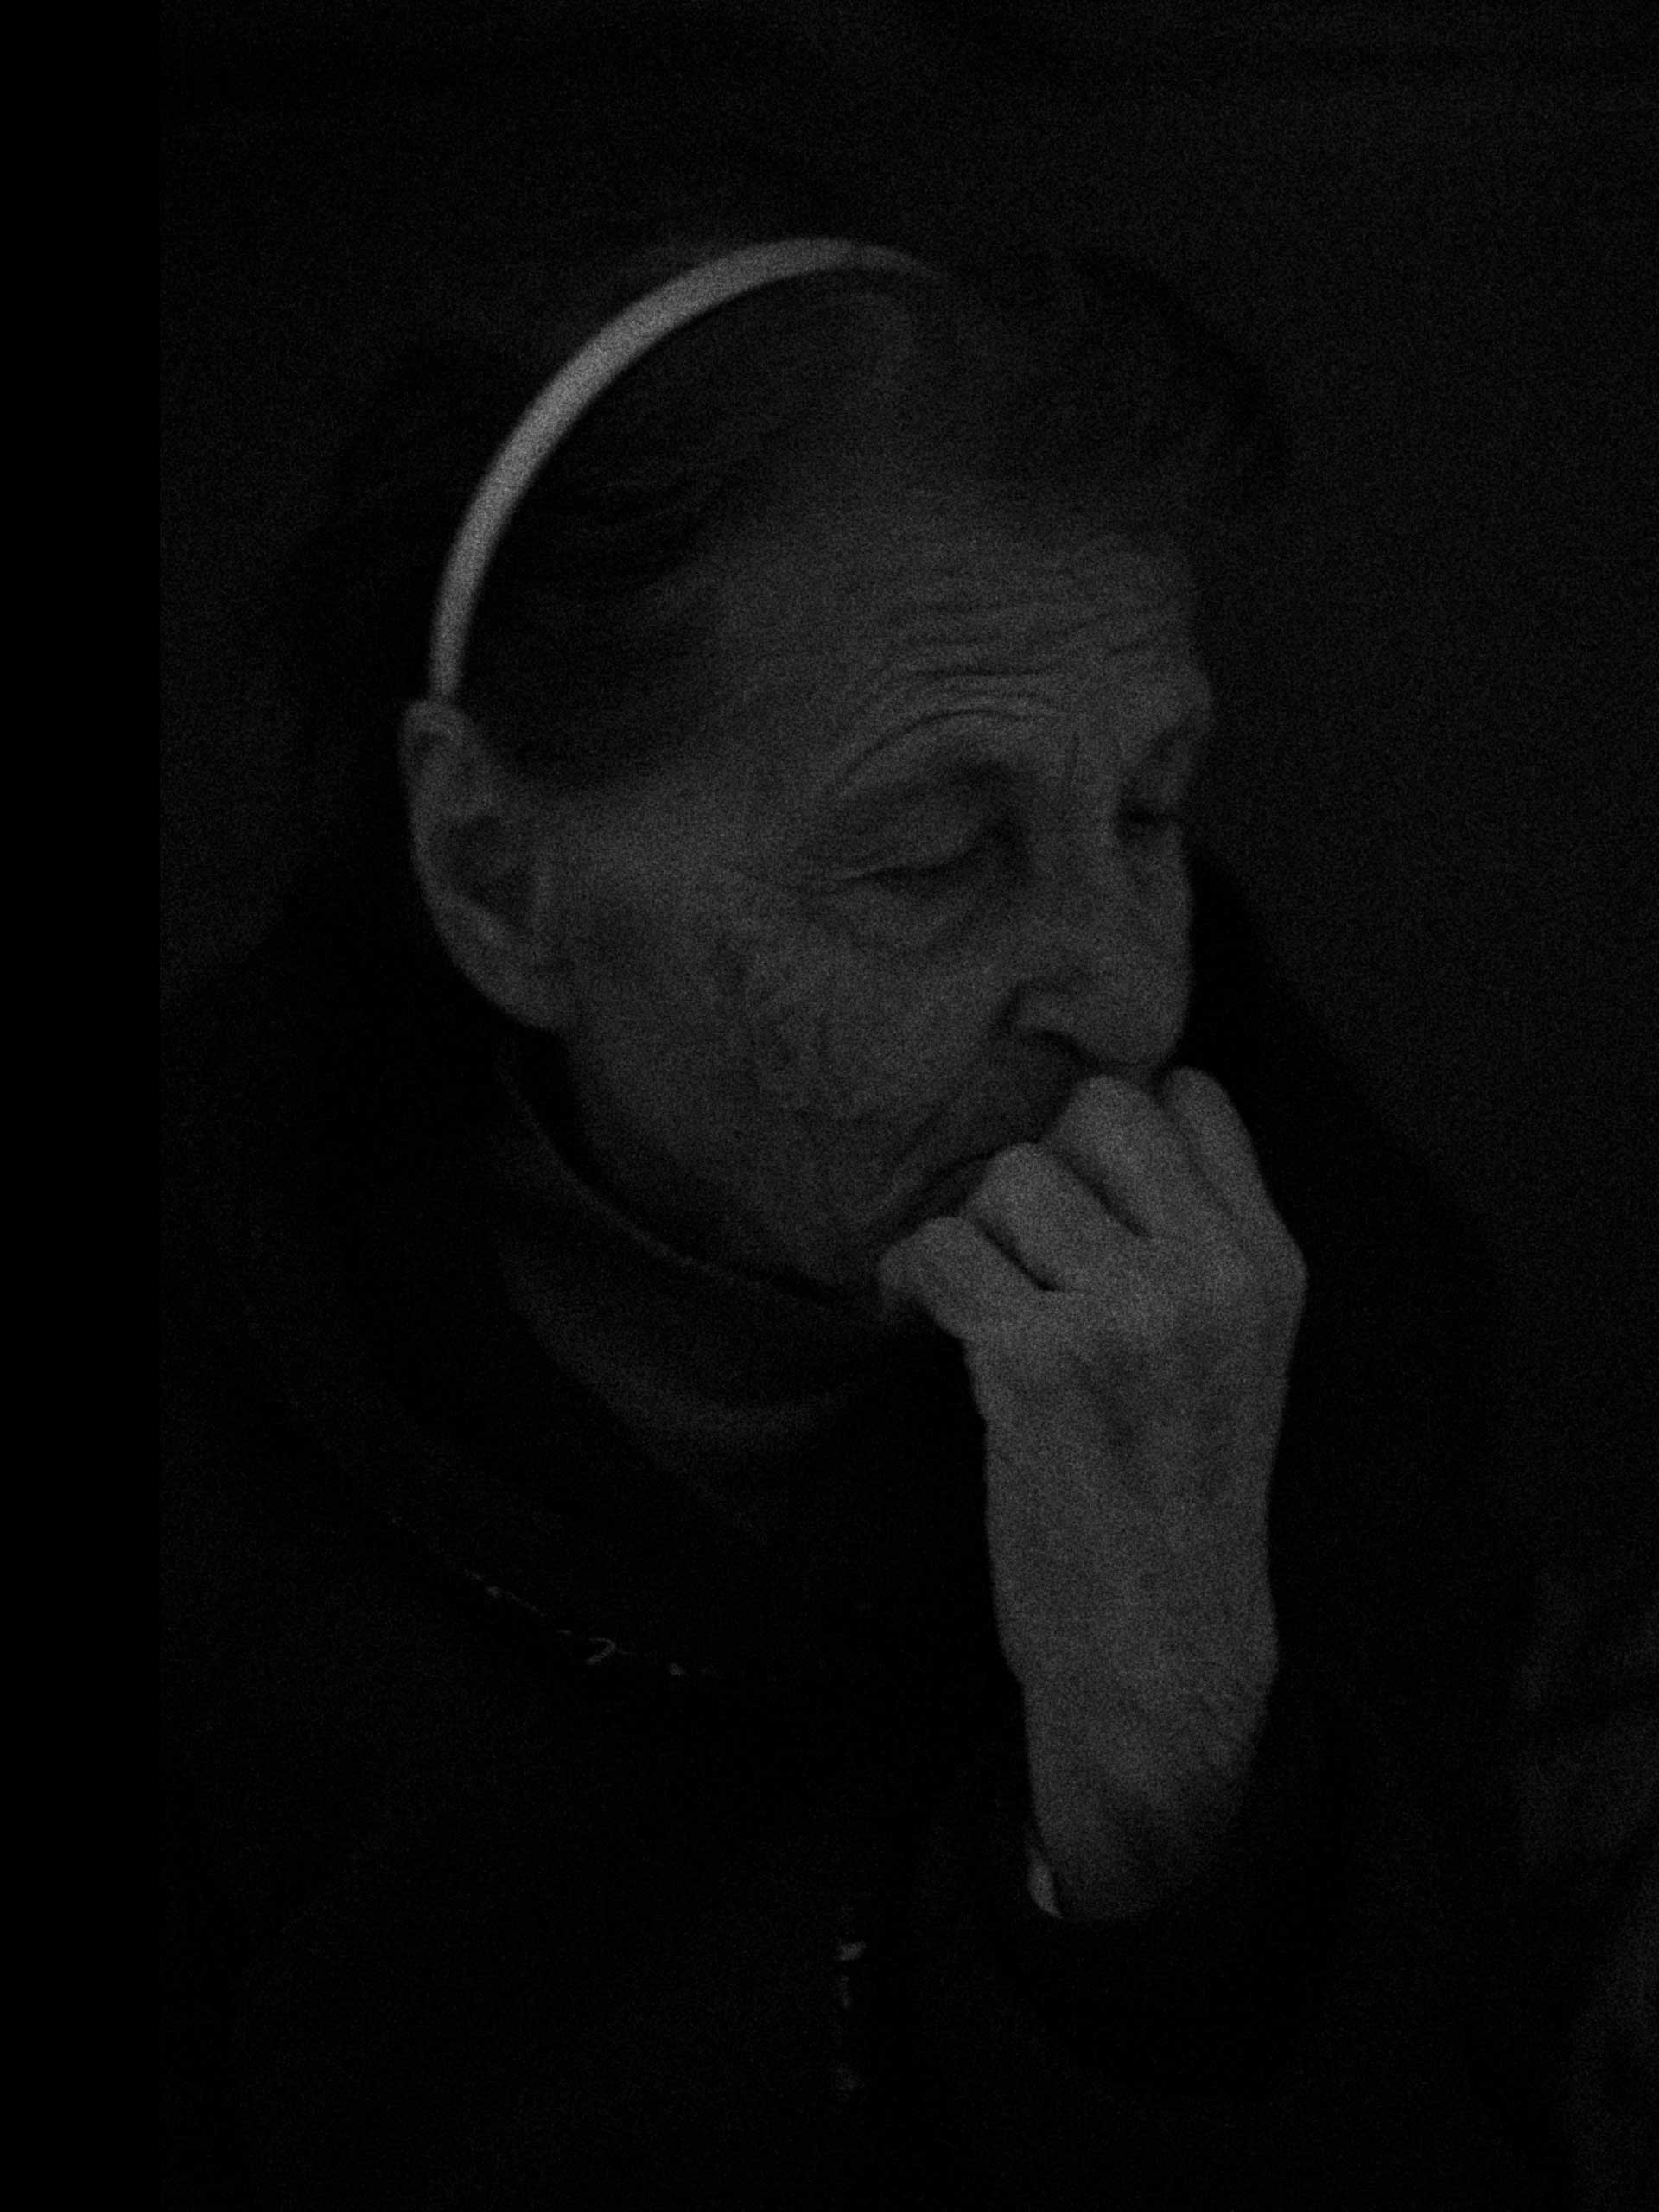 A portrait of Valentina is taken as we listened to shelling close to the shelter. The noise was actually the aftershock of a Tochka-U missile hitting a chemical plant some kilometers away sending a shockwave across much of the area. Donetsk, Kievski District, Ukraine. Oct. 20, 2014.